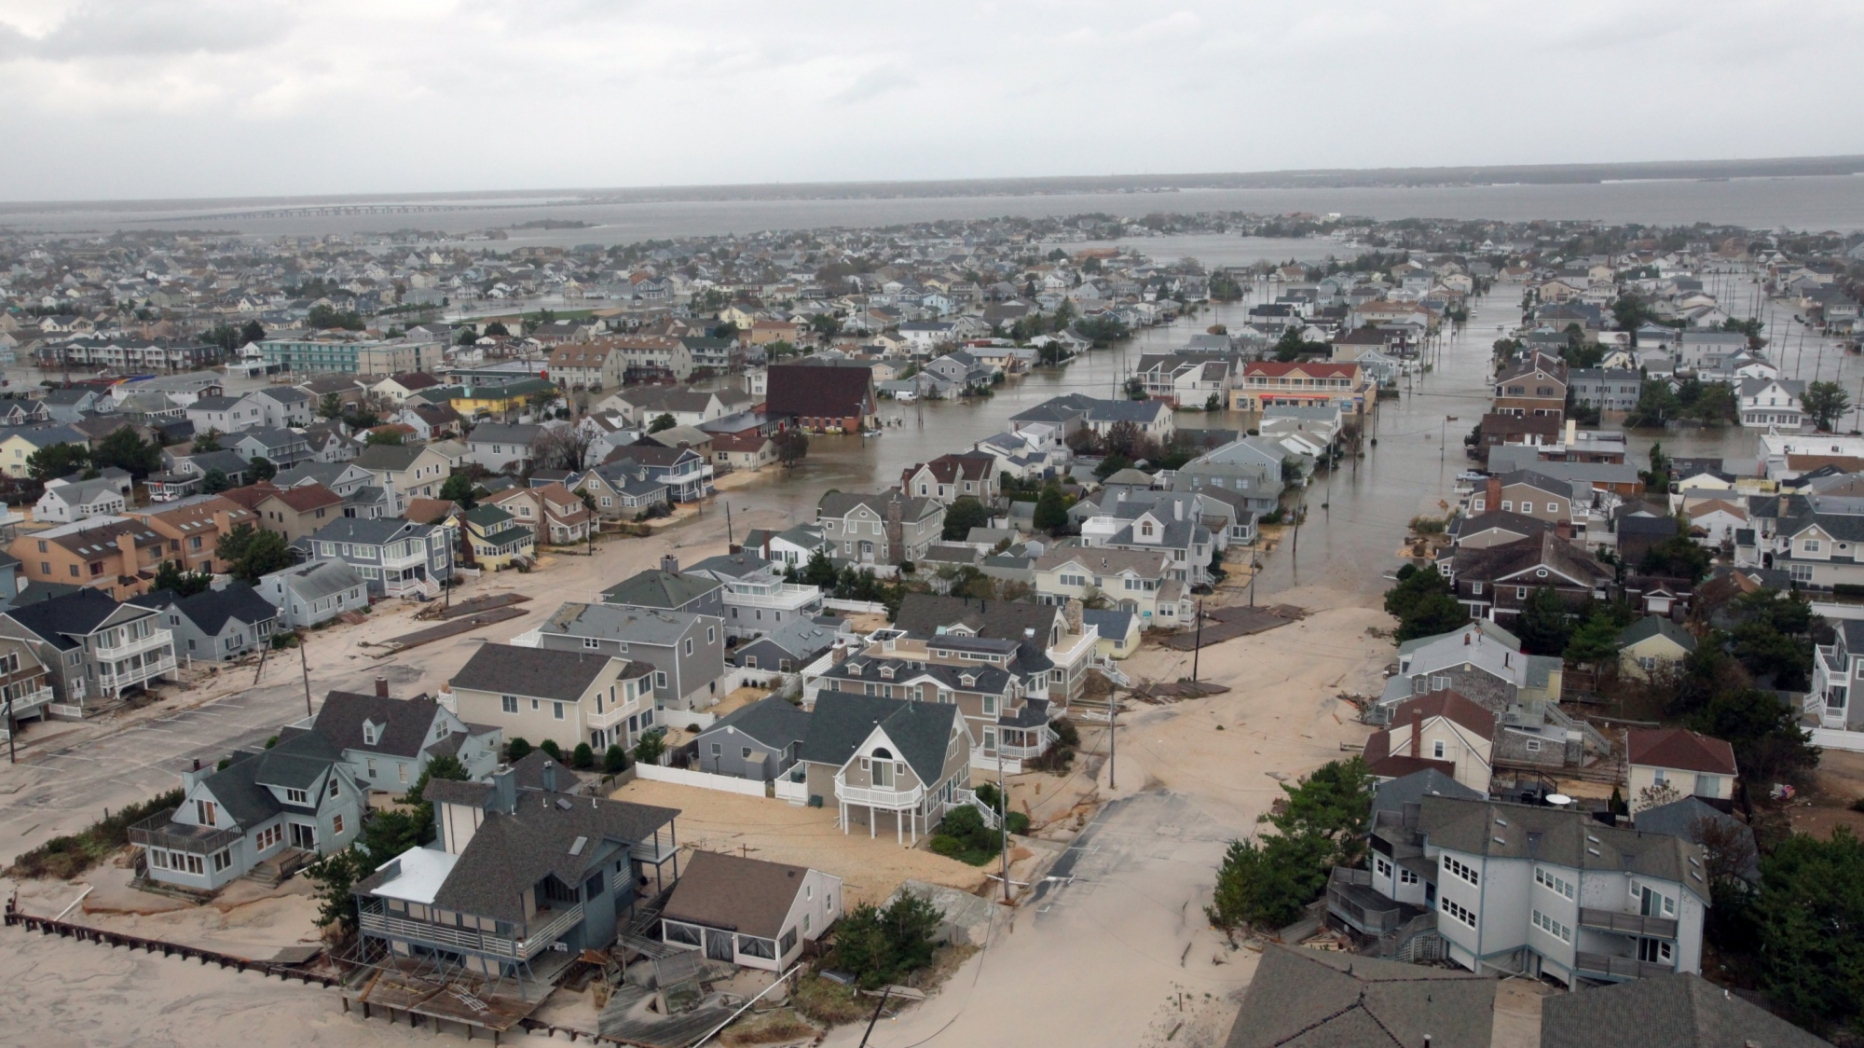 Flooded residential neighborhood. Sand has also come in several hundred meters from the beach